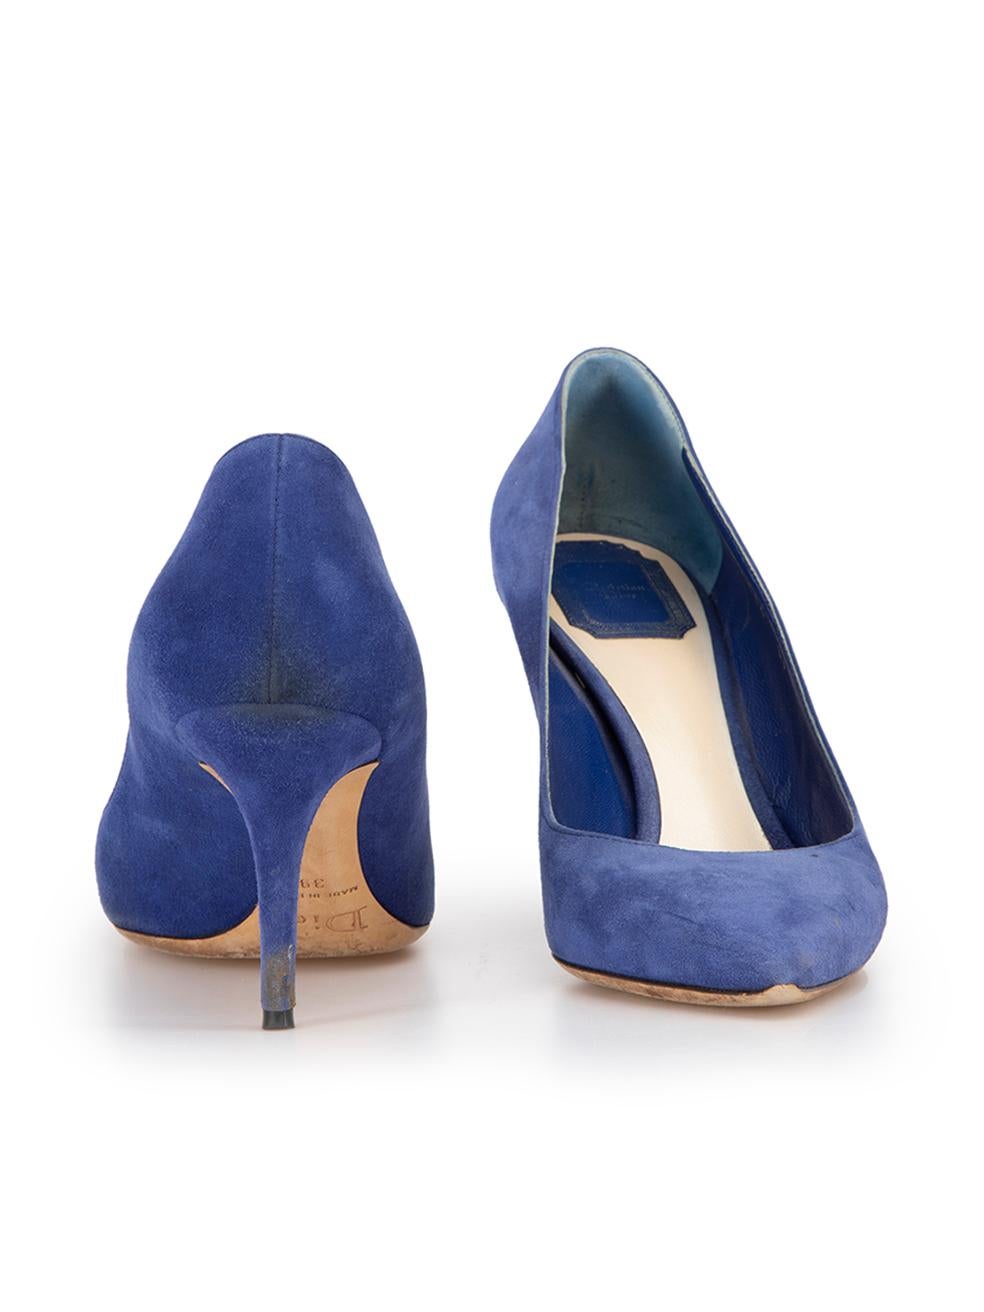 Dior Women's Blue Suede Pointed Toe Slip On Pumps In Good Condition For Sale In London, GB